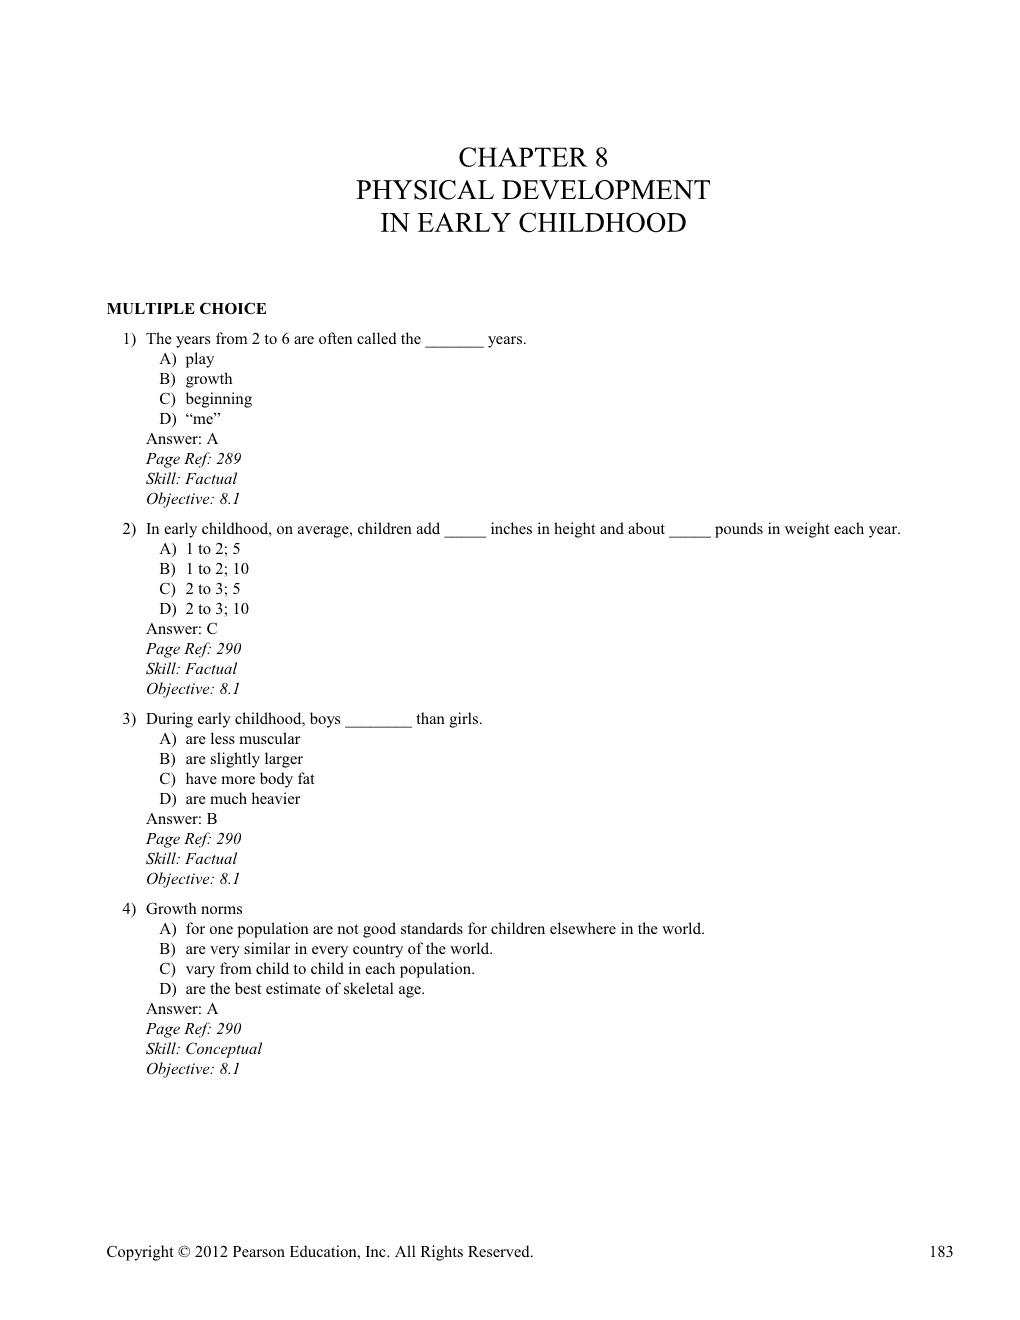 Chapter 8 Physical Development in Early Childhood